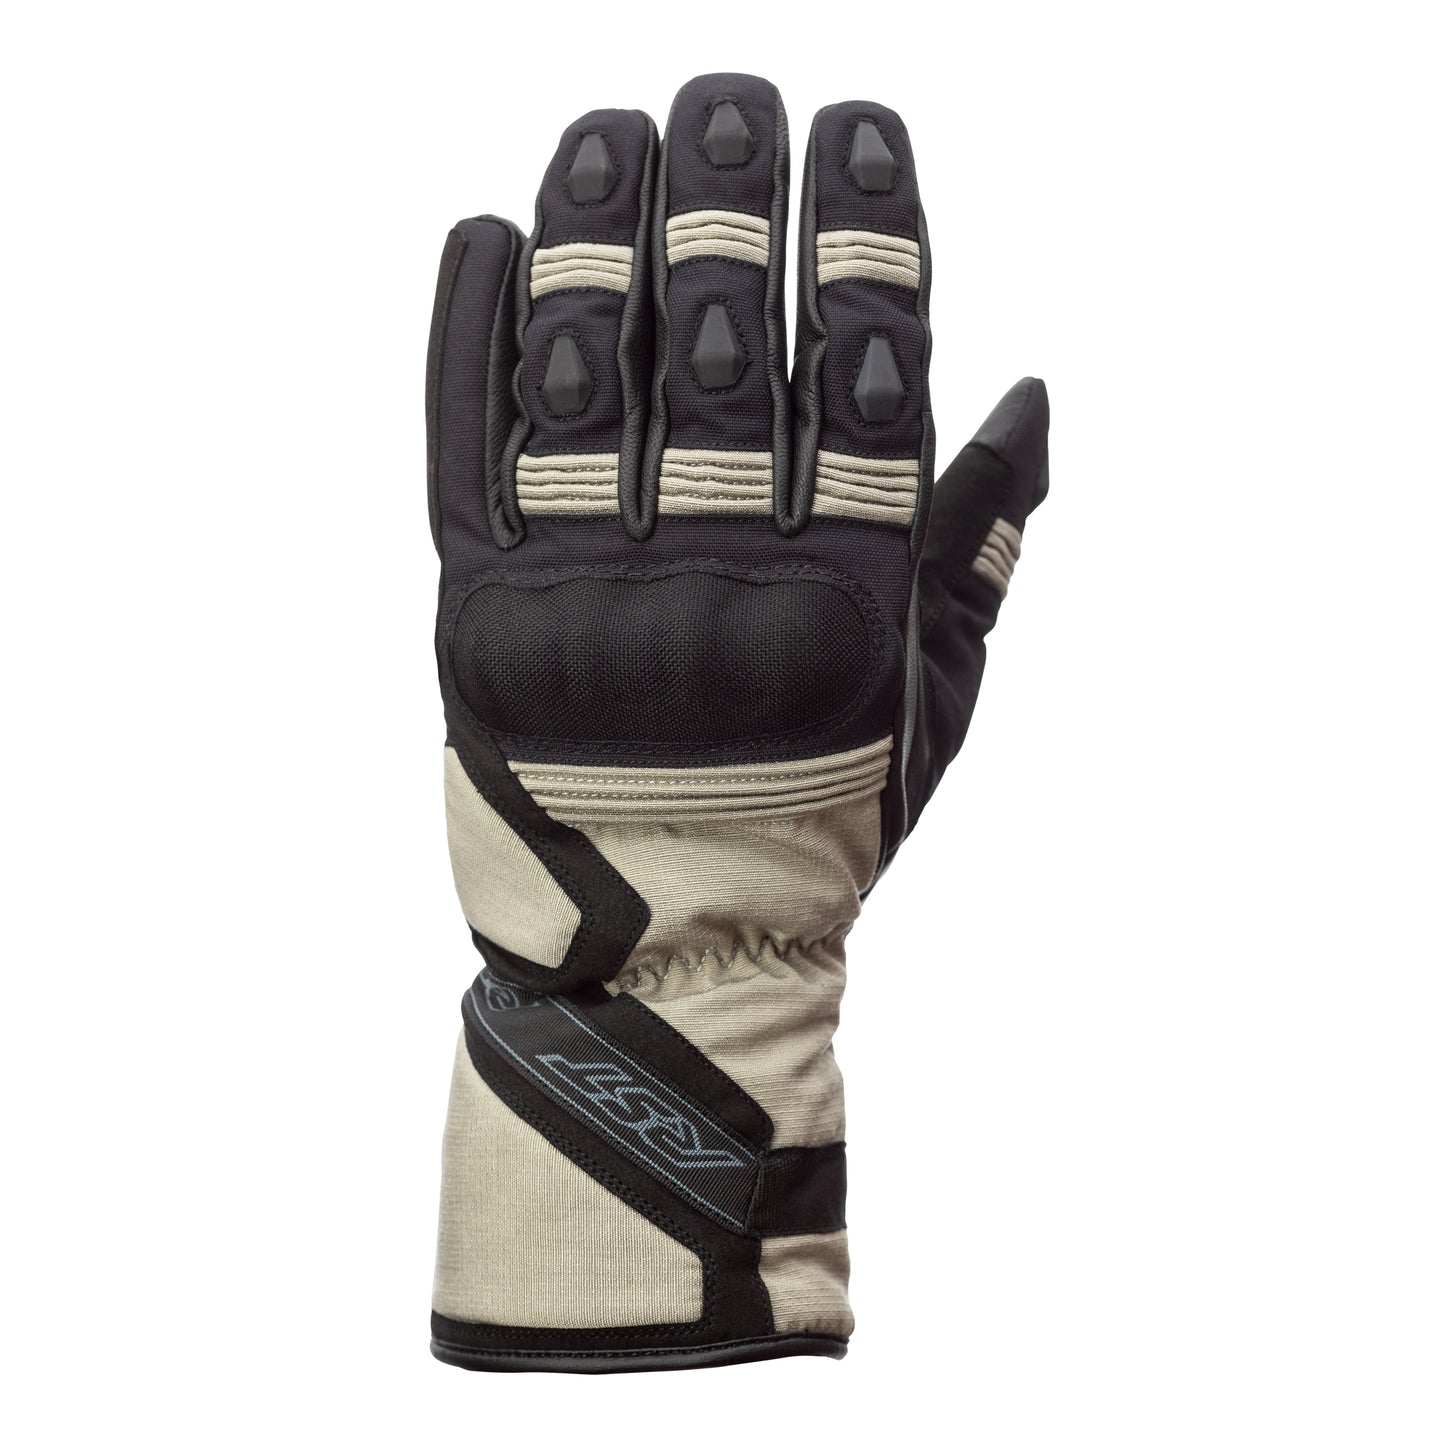 RST X-Raid Waterproof Gloves - CE APPROVED - Magnesium/Black